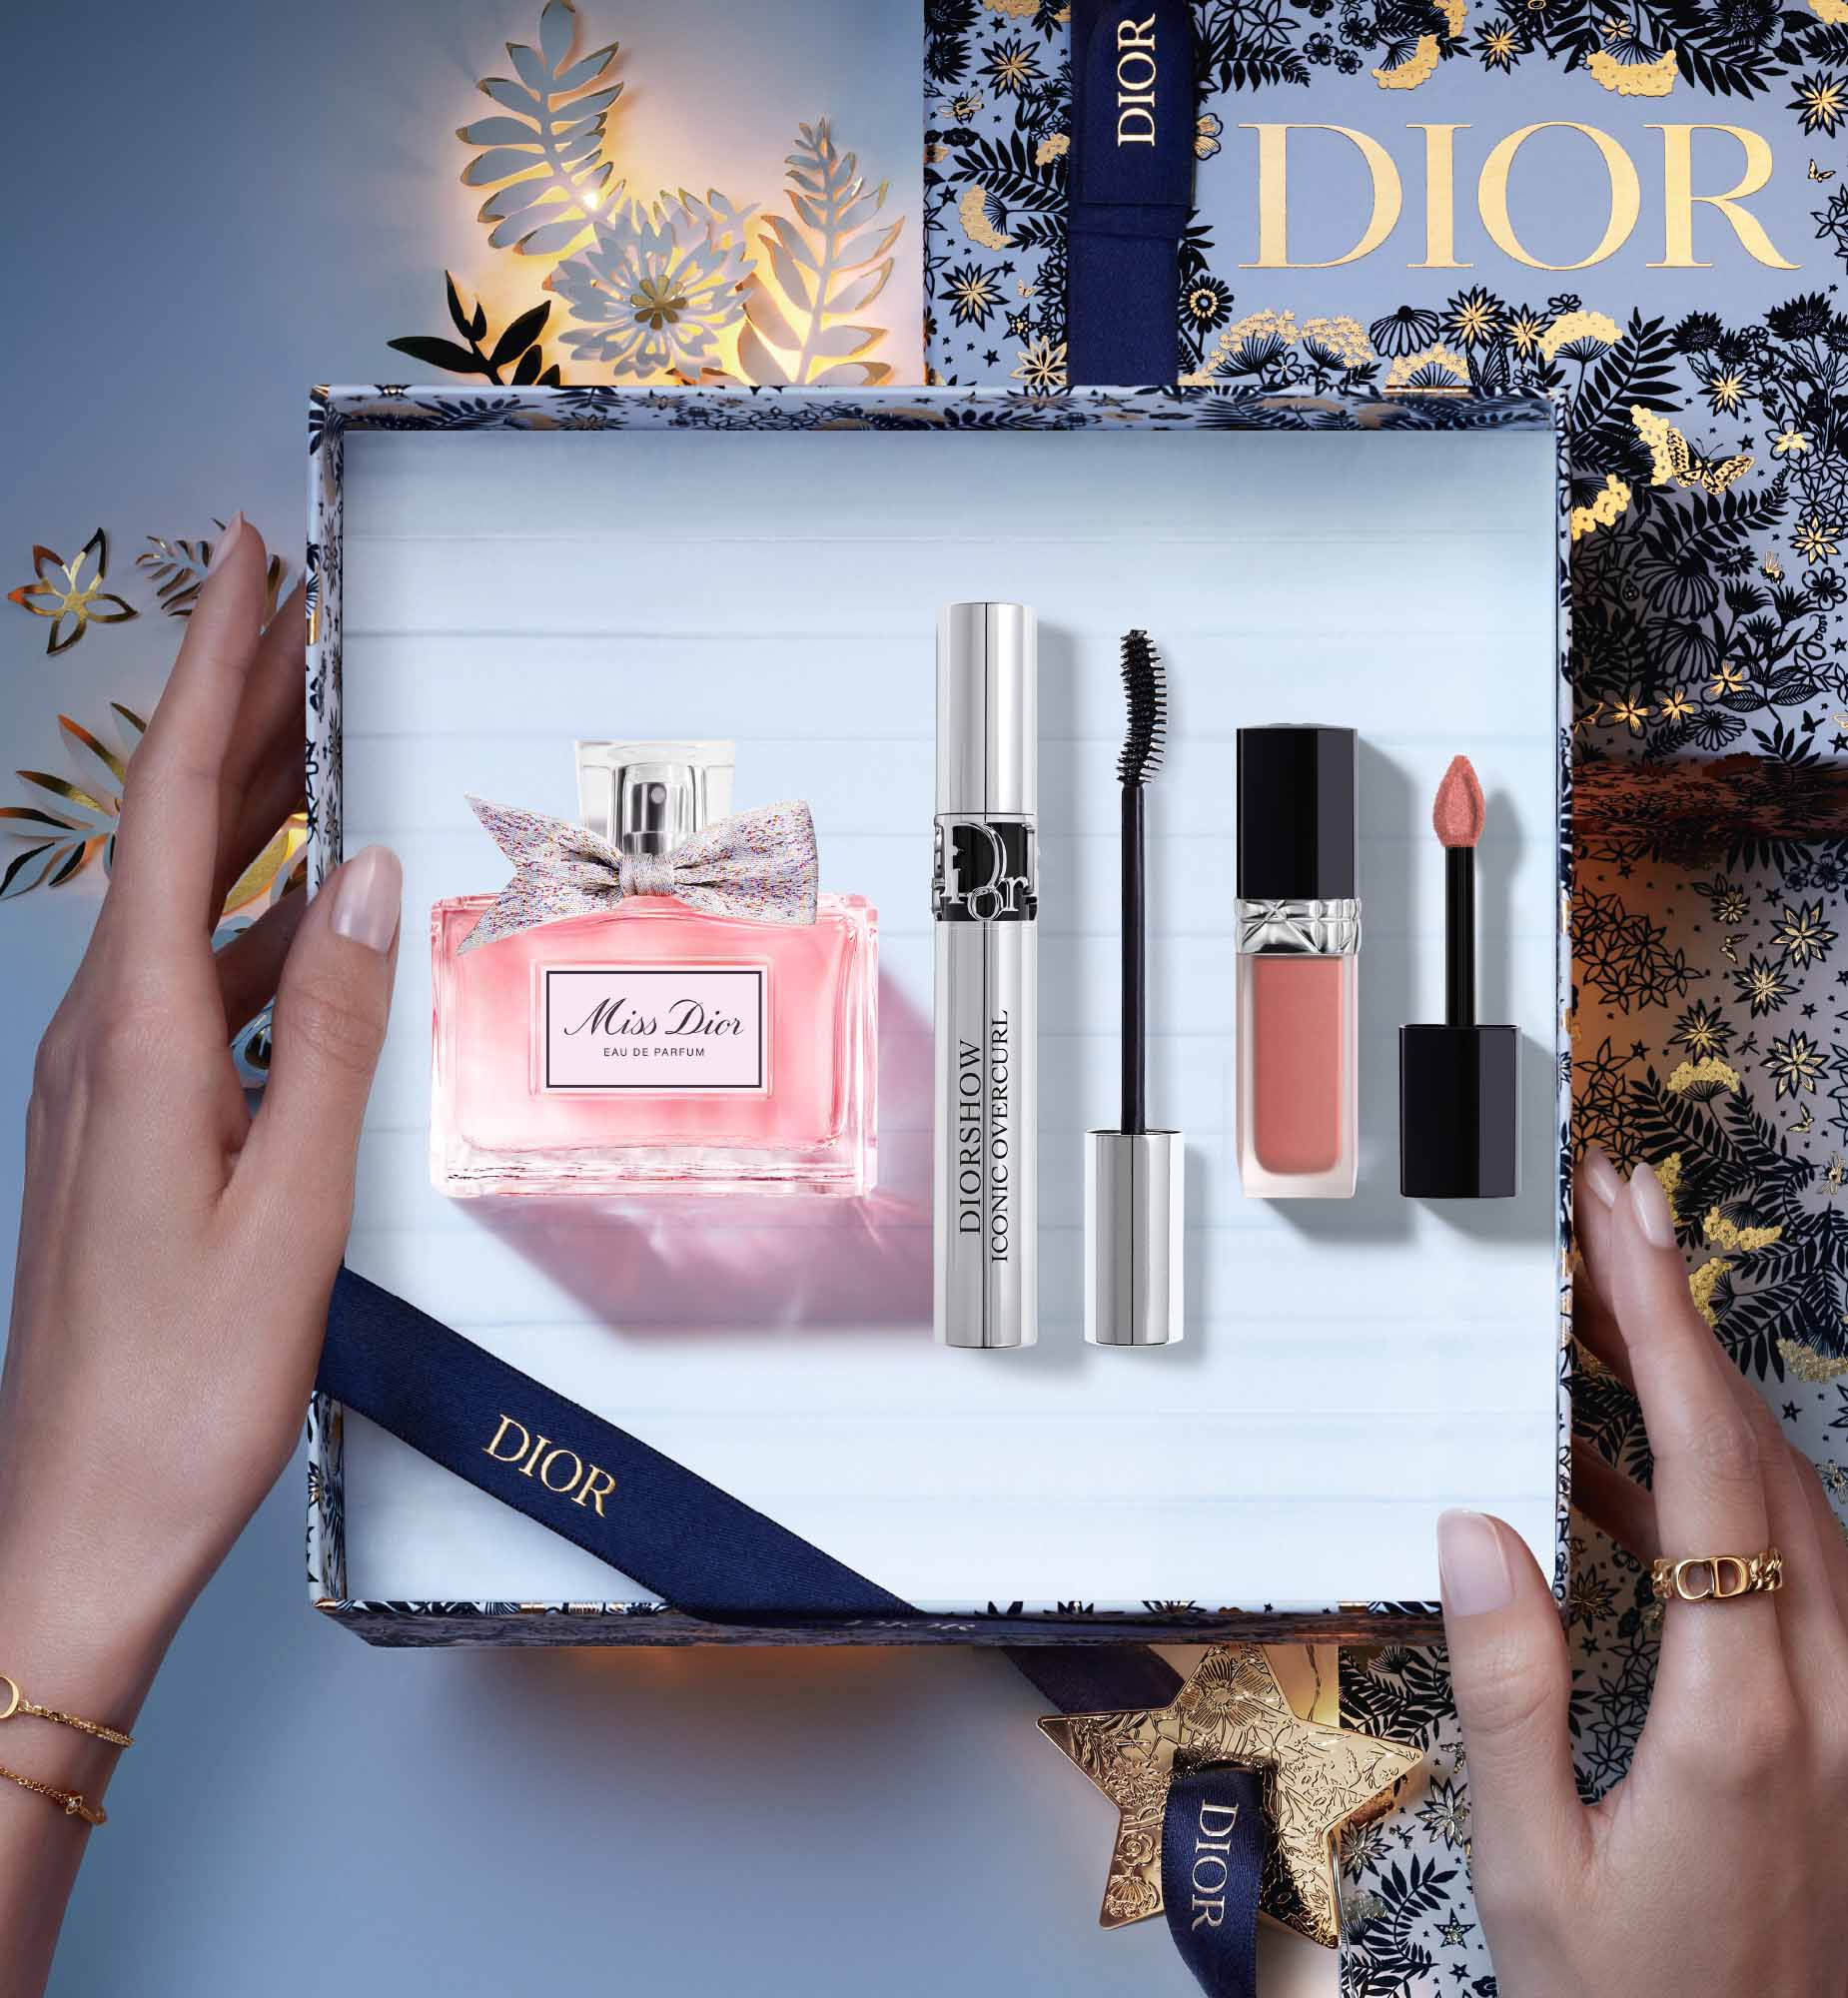 DIOR Receive a Complimentary DIOR 4Piece Gift Set with any 165 Dior Beauty  or Womens Fragrance Purchase  Macys